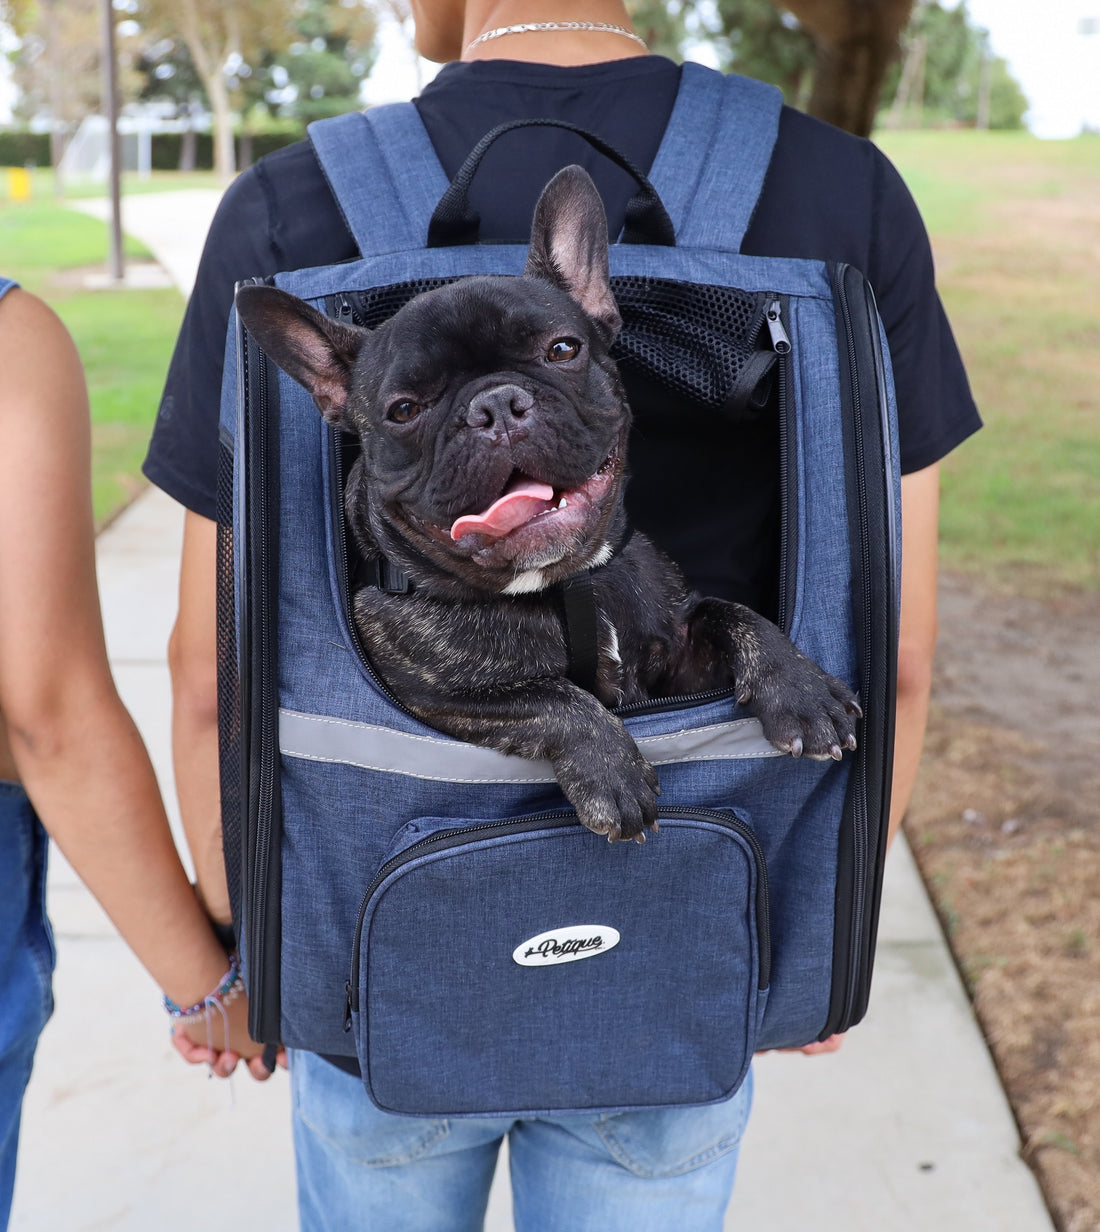 Top 5 Reasons Why Dogs, Cats and Other Pets Need Pet Carriers